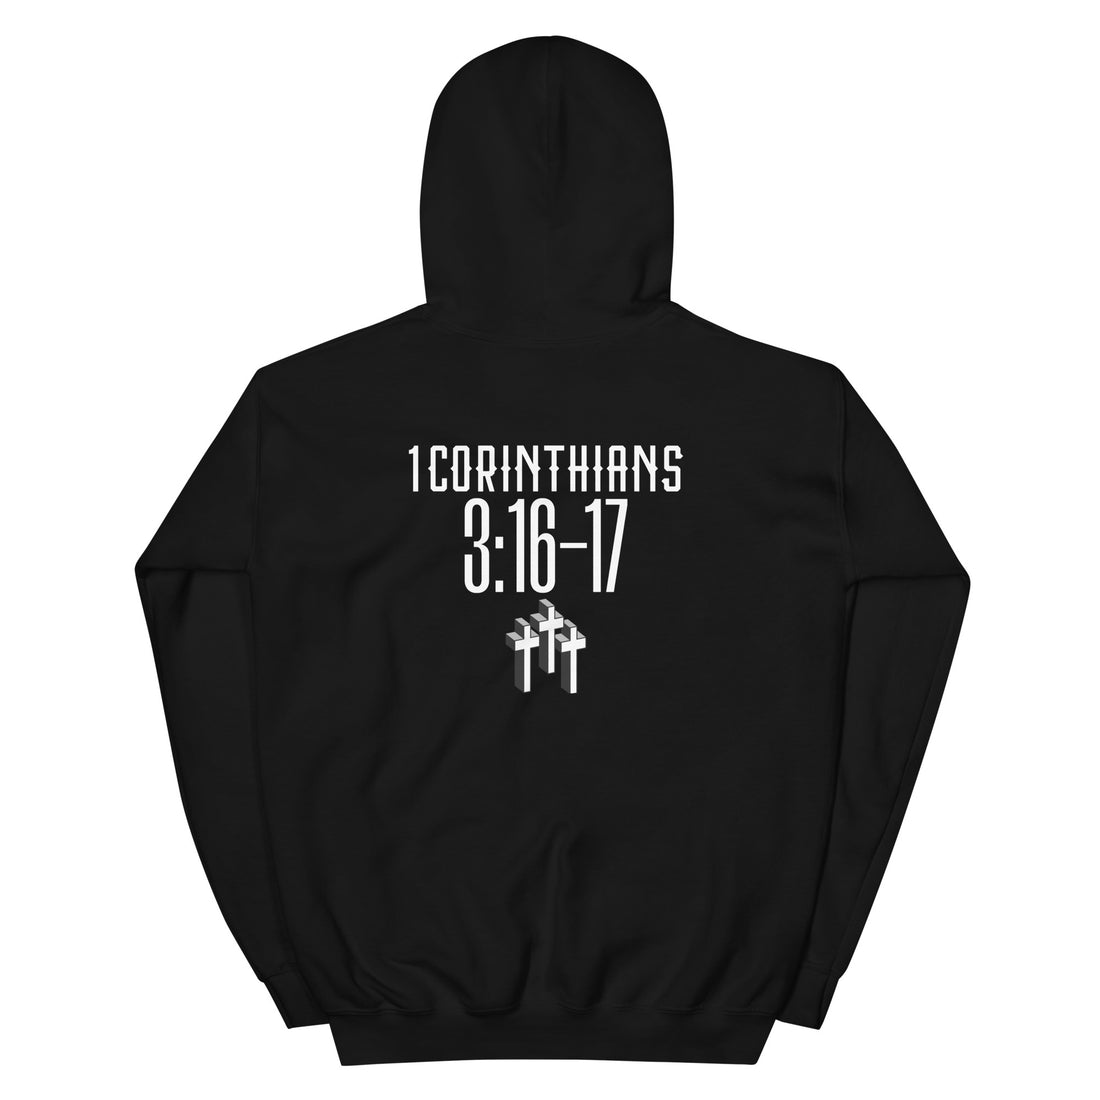 I NEVER NEEDED IT MENS FRONT AND BACK HOODIE